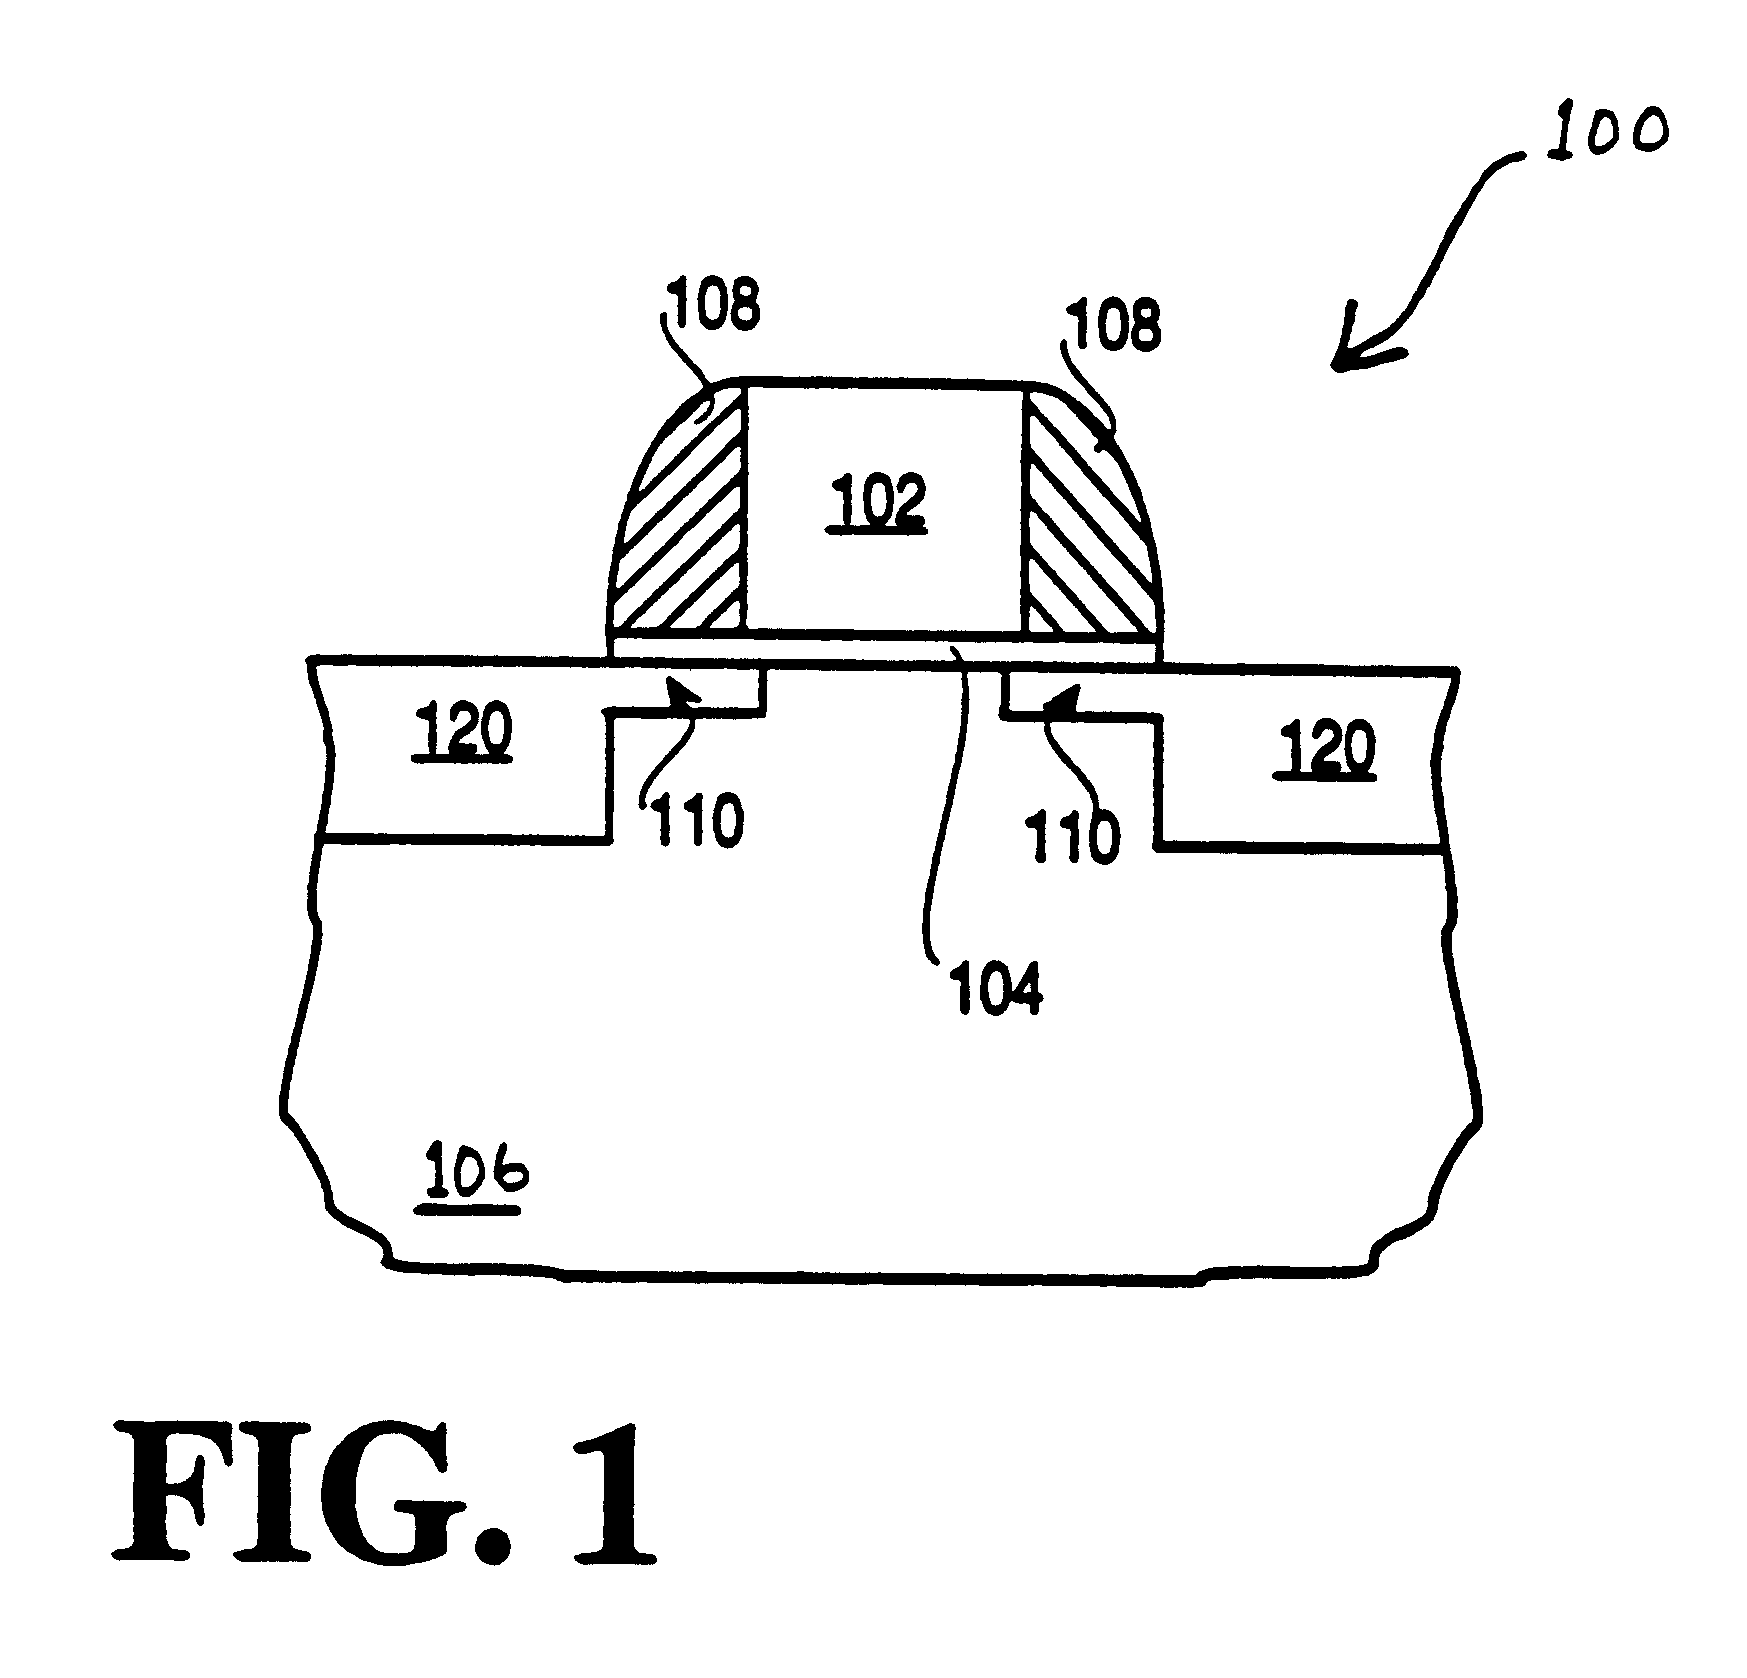 Semiconductor device having deposited silicon regions and a method of fabrication